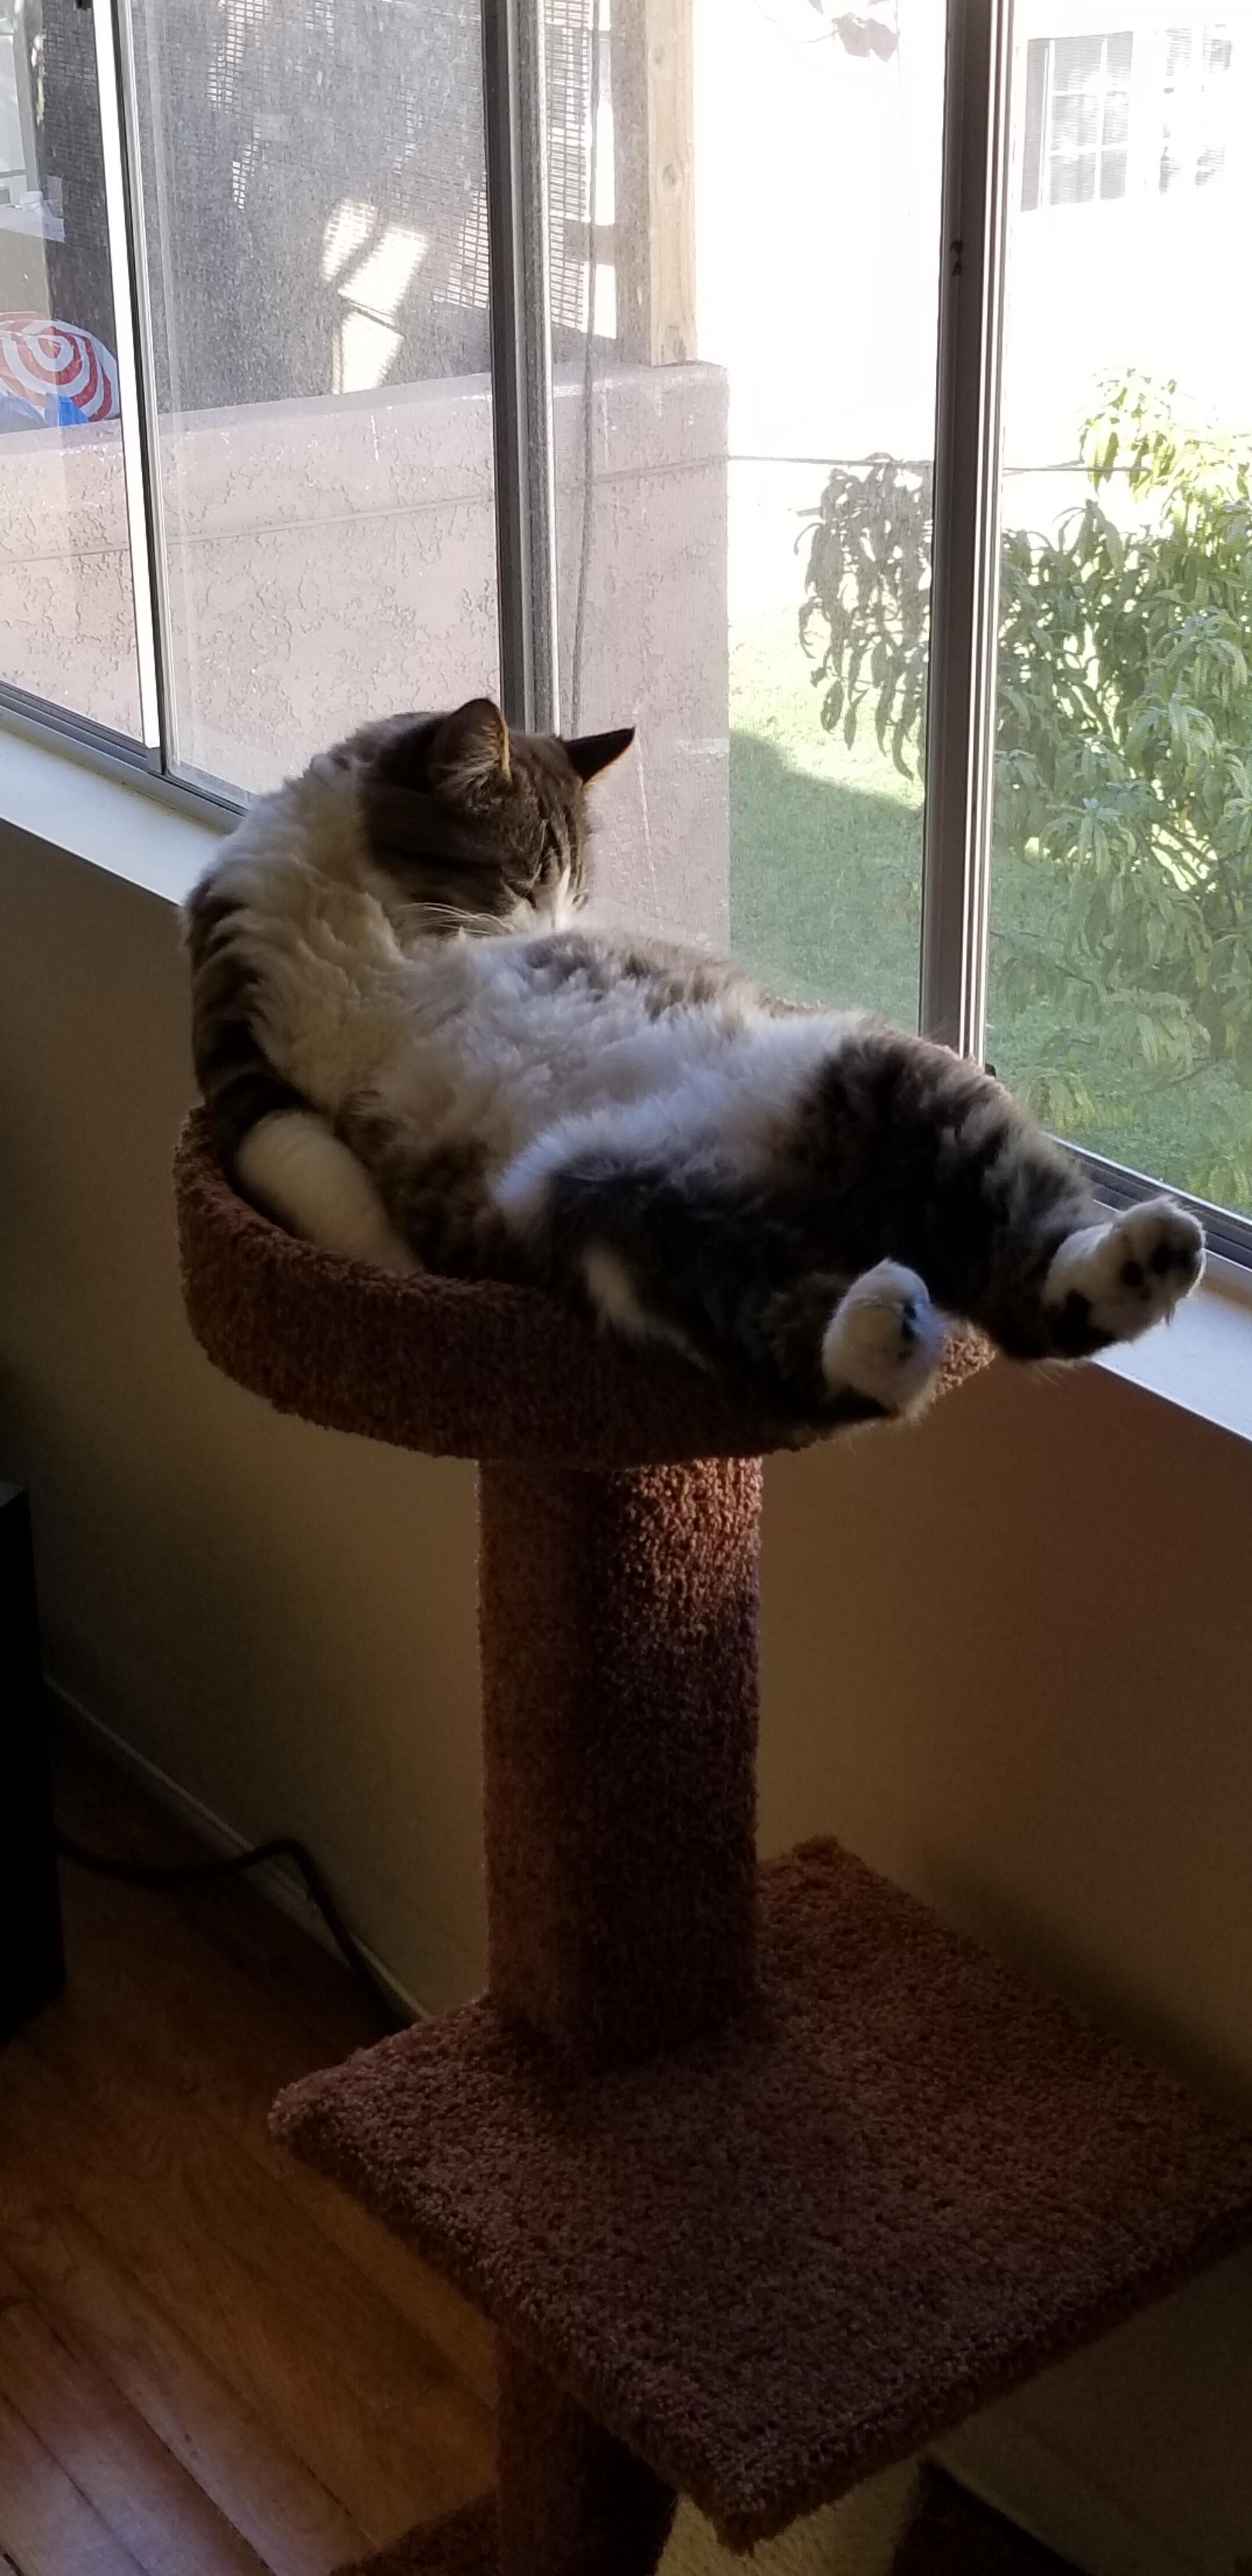 My cat just enjoying his life... What a life!!